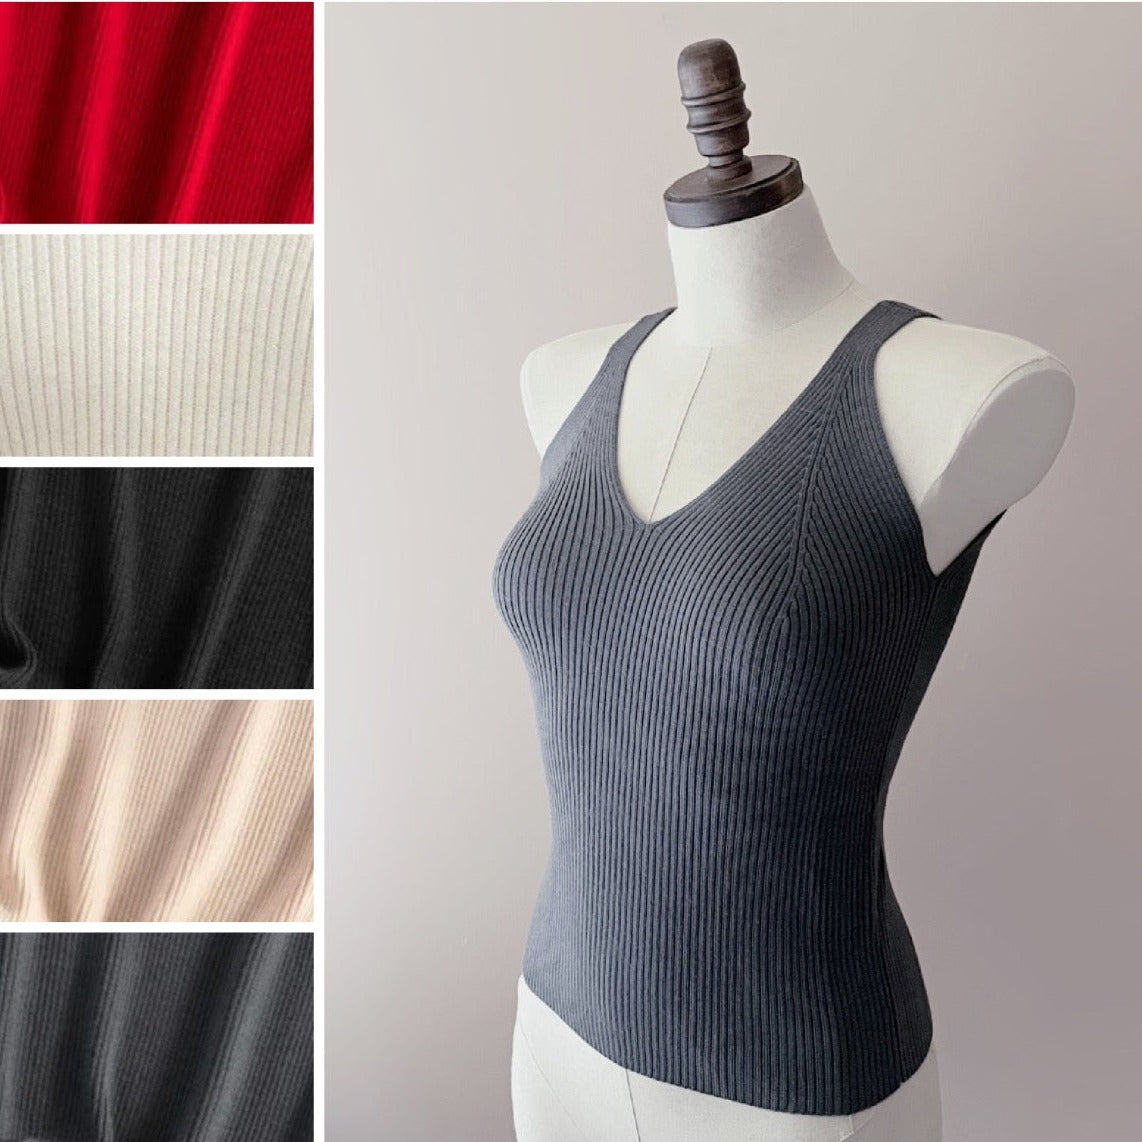 merino wool tank to for ladies | shop merino wool apparel from Canada 